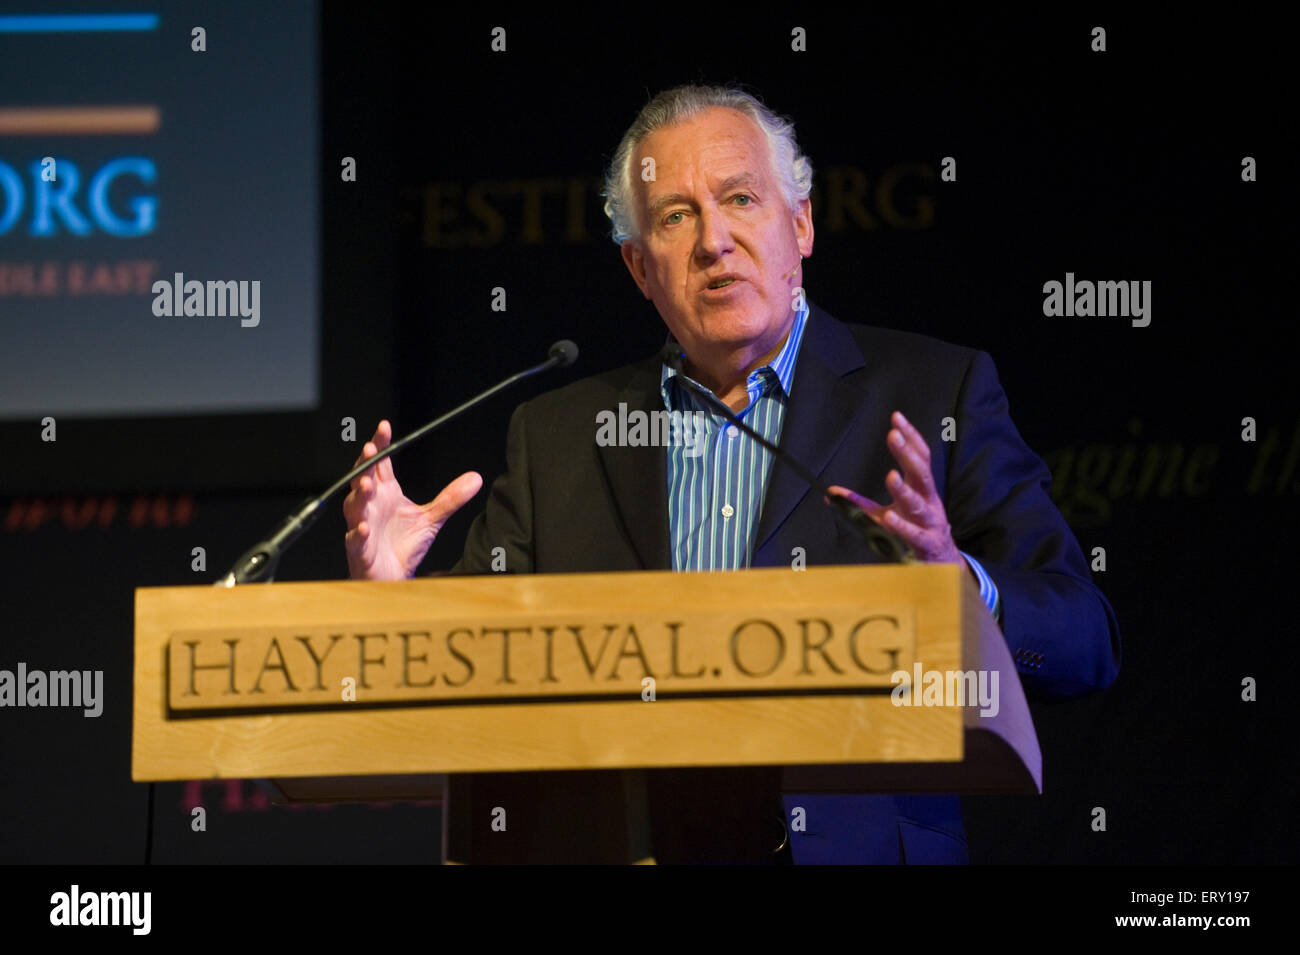 Peter Hain former Labour MP speaking on stage at Hay Festival 2015 Stock Photo